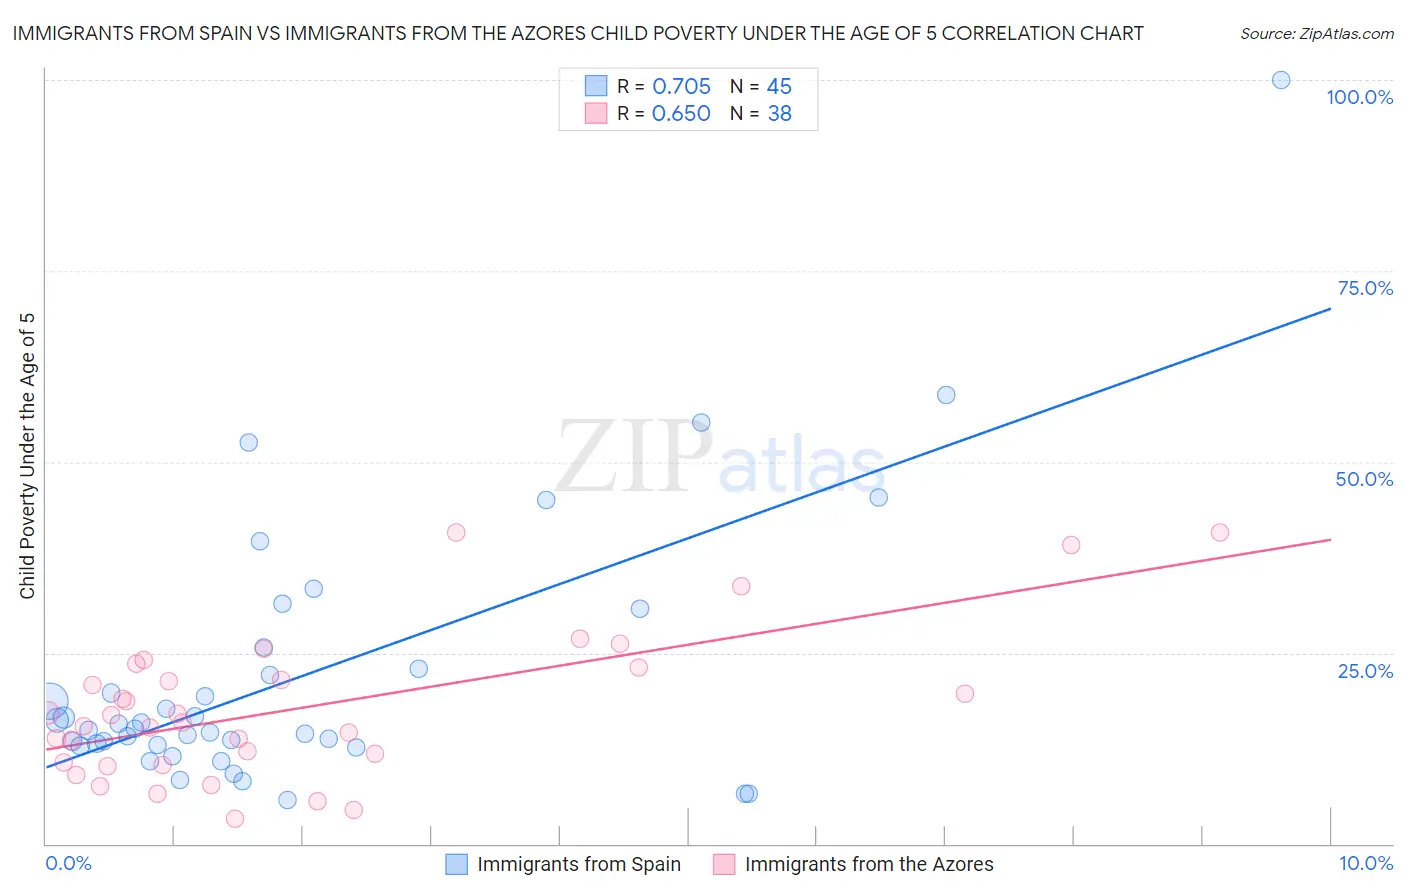 Immigrants from Spain vs Immigrants from the Azores Child Poverty Under the Age of 5